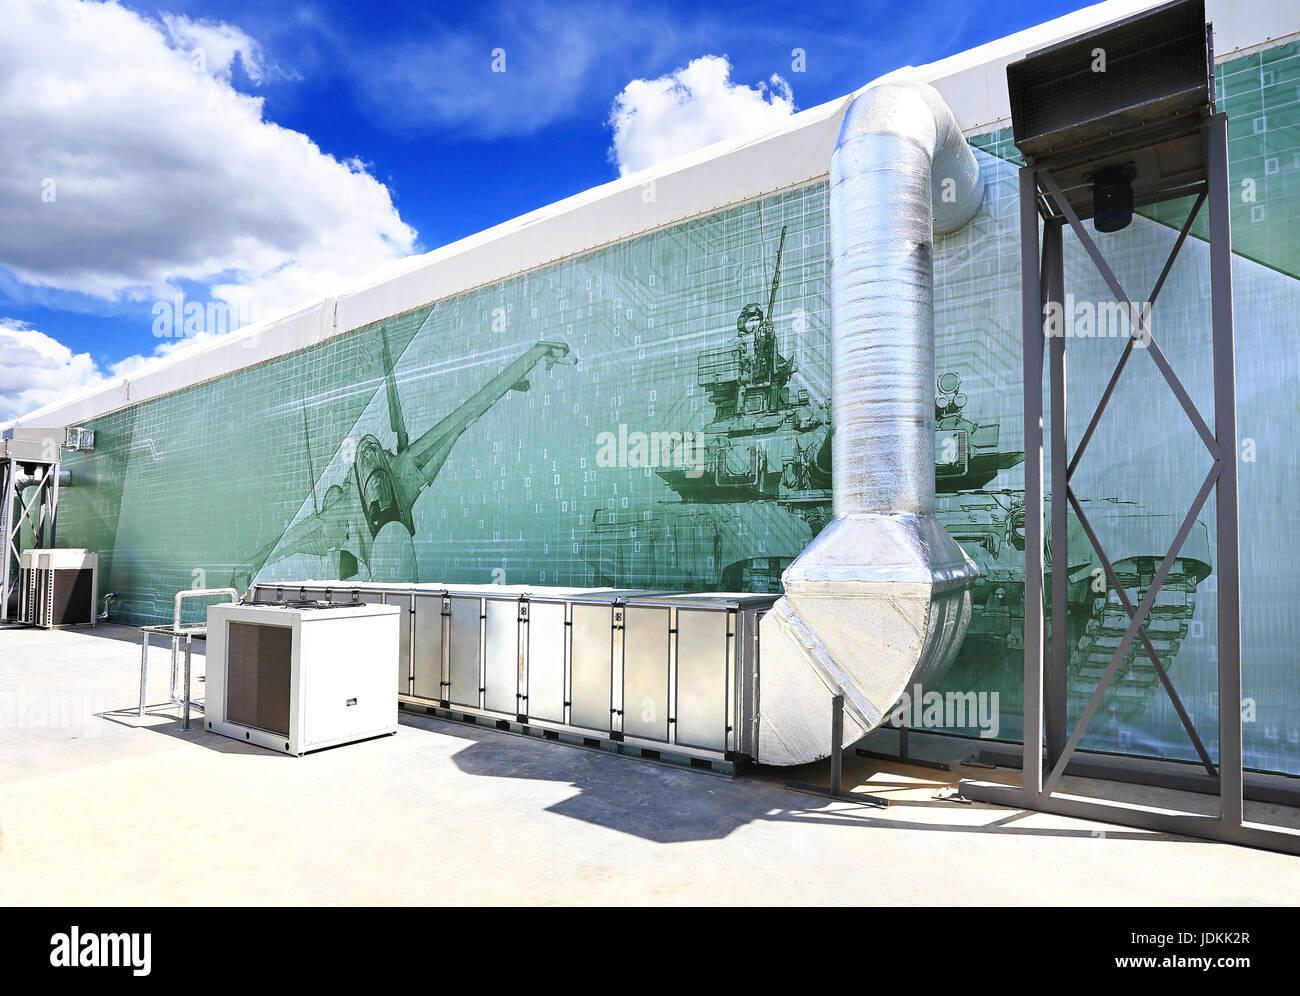 Ventilation pipes and actuators on the wall of an exhibition pavilion Stock Photo